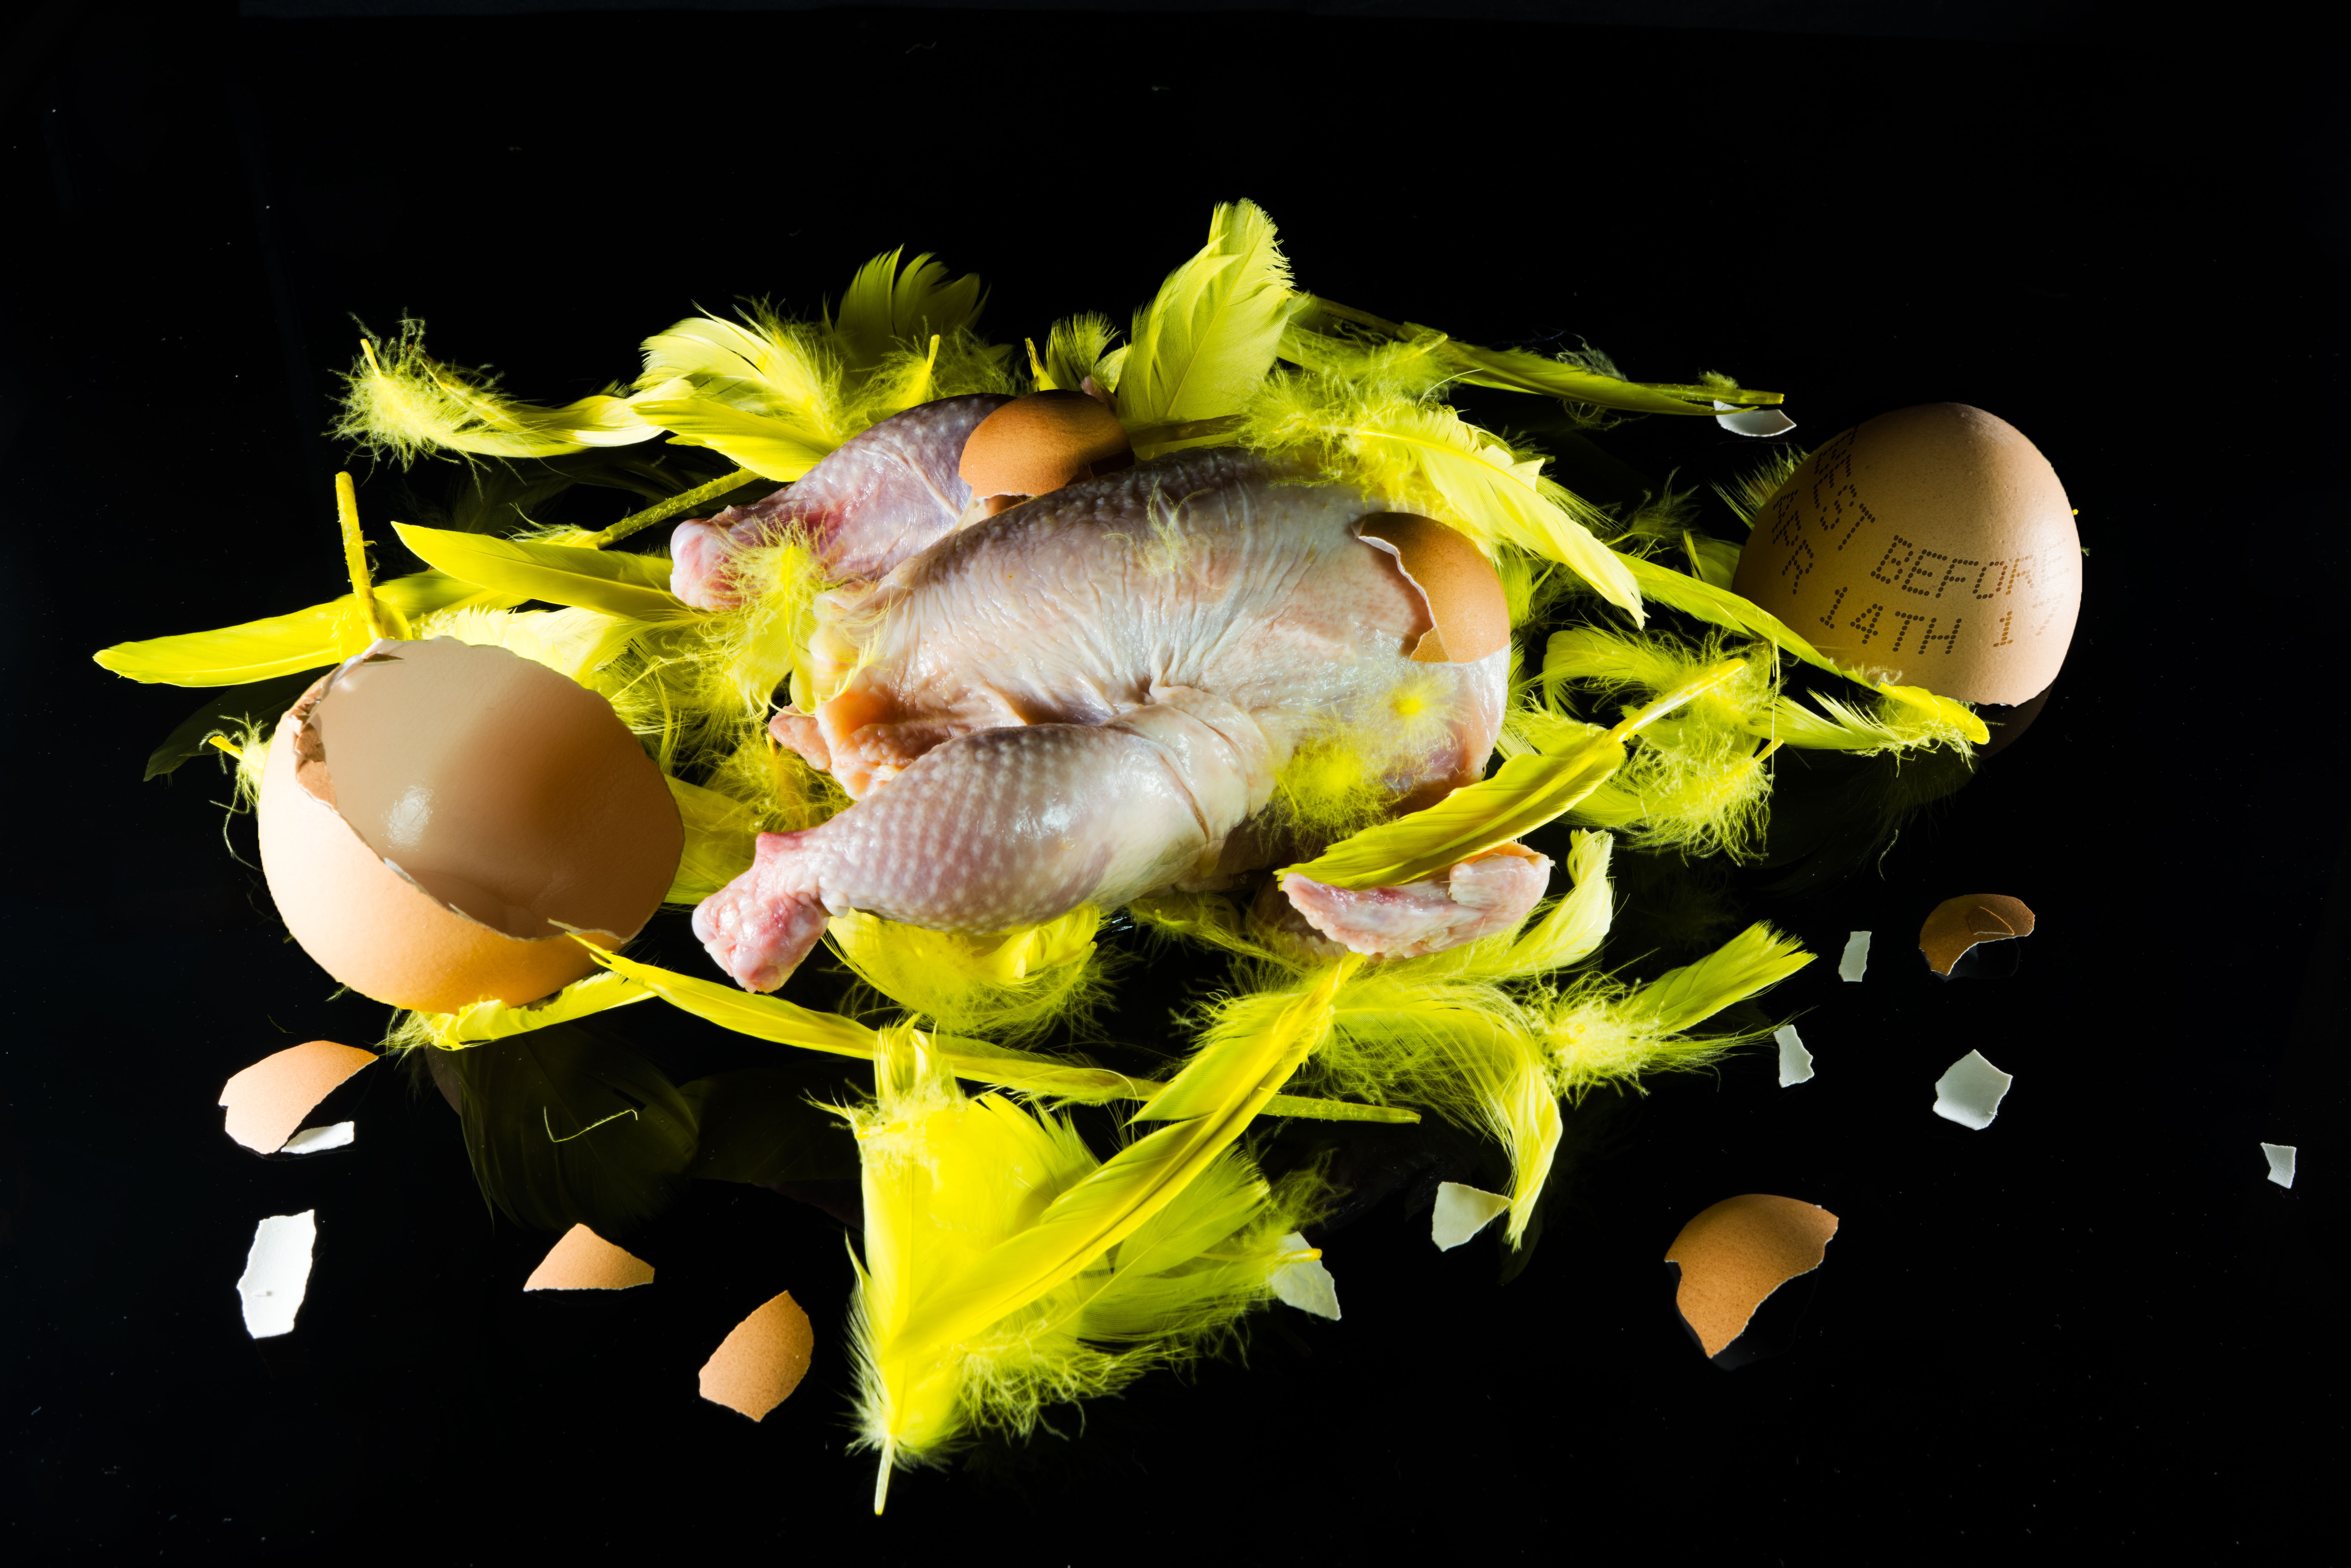 Wallpaper, Easter, eggs, egg, Chicken, jesus, feathers, poultry, yellow, feather, alternative, religion, religious, meat, hatch, nature, shell, black, background, reflection, reflect 7952x5304